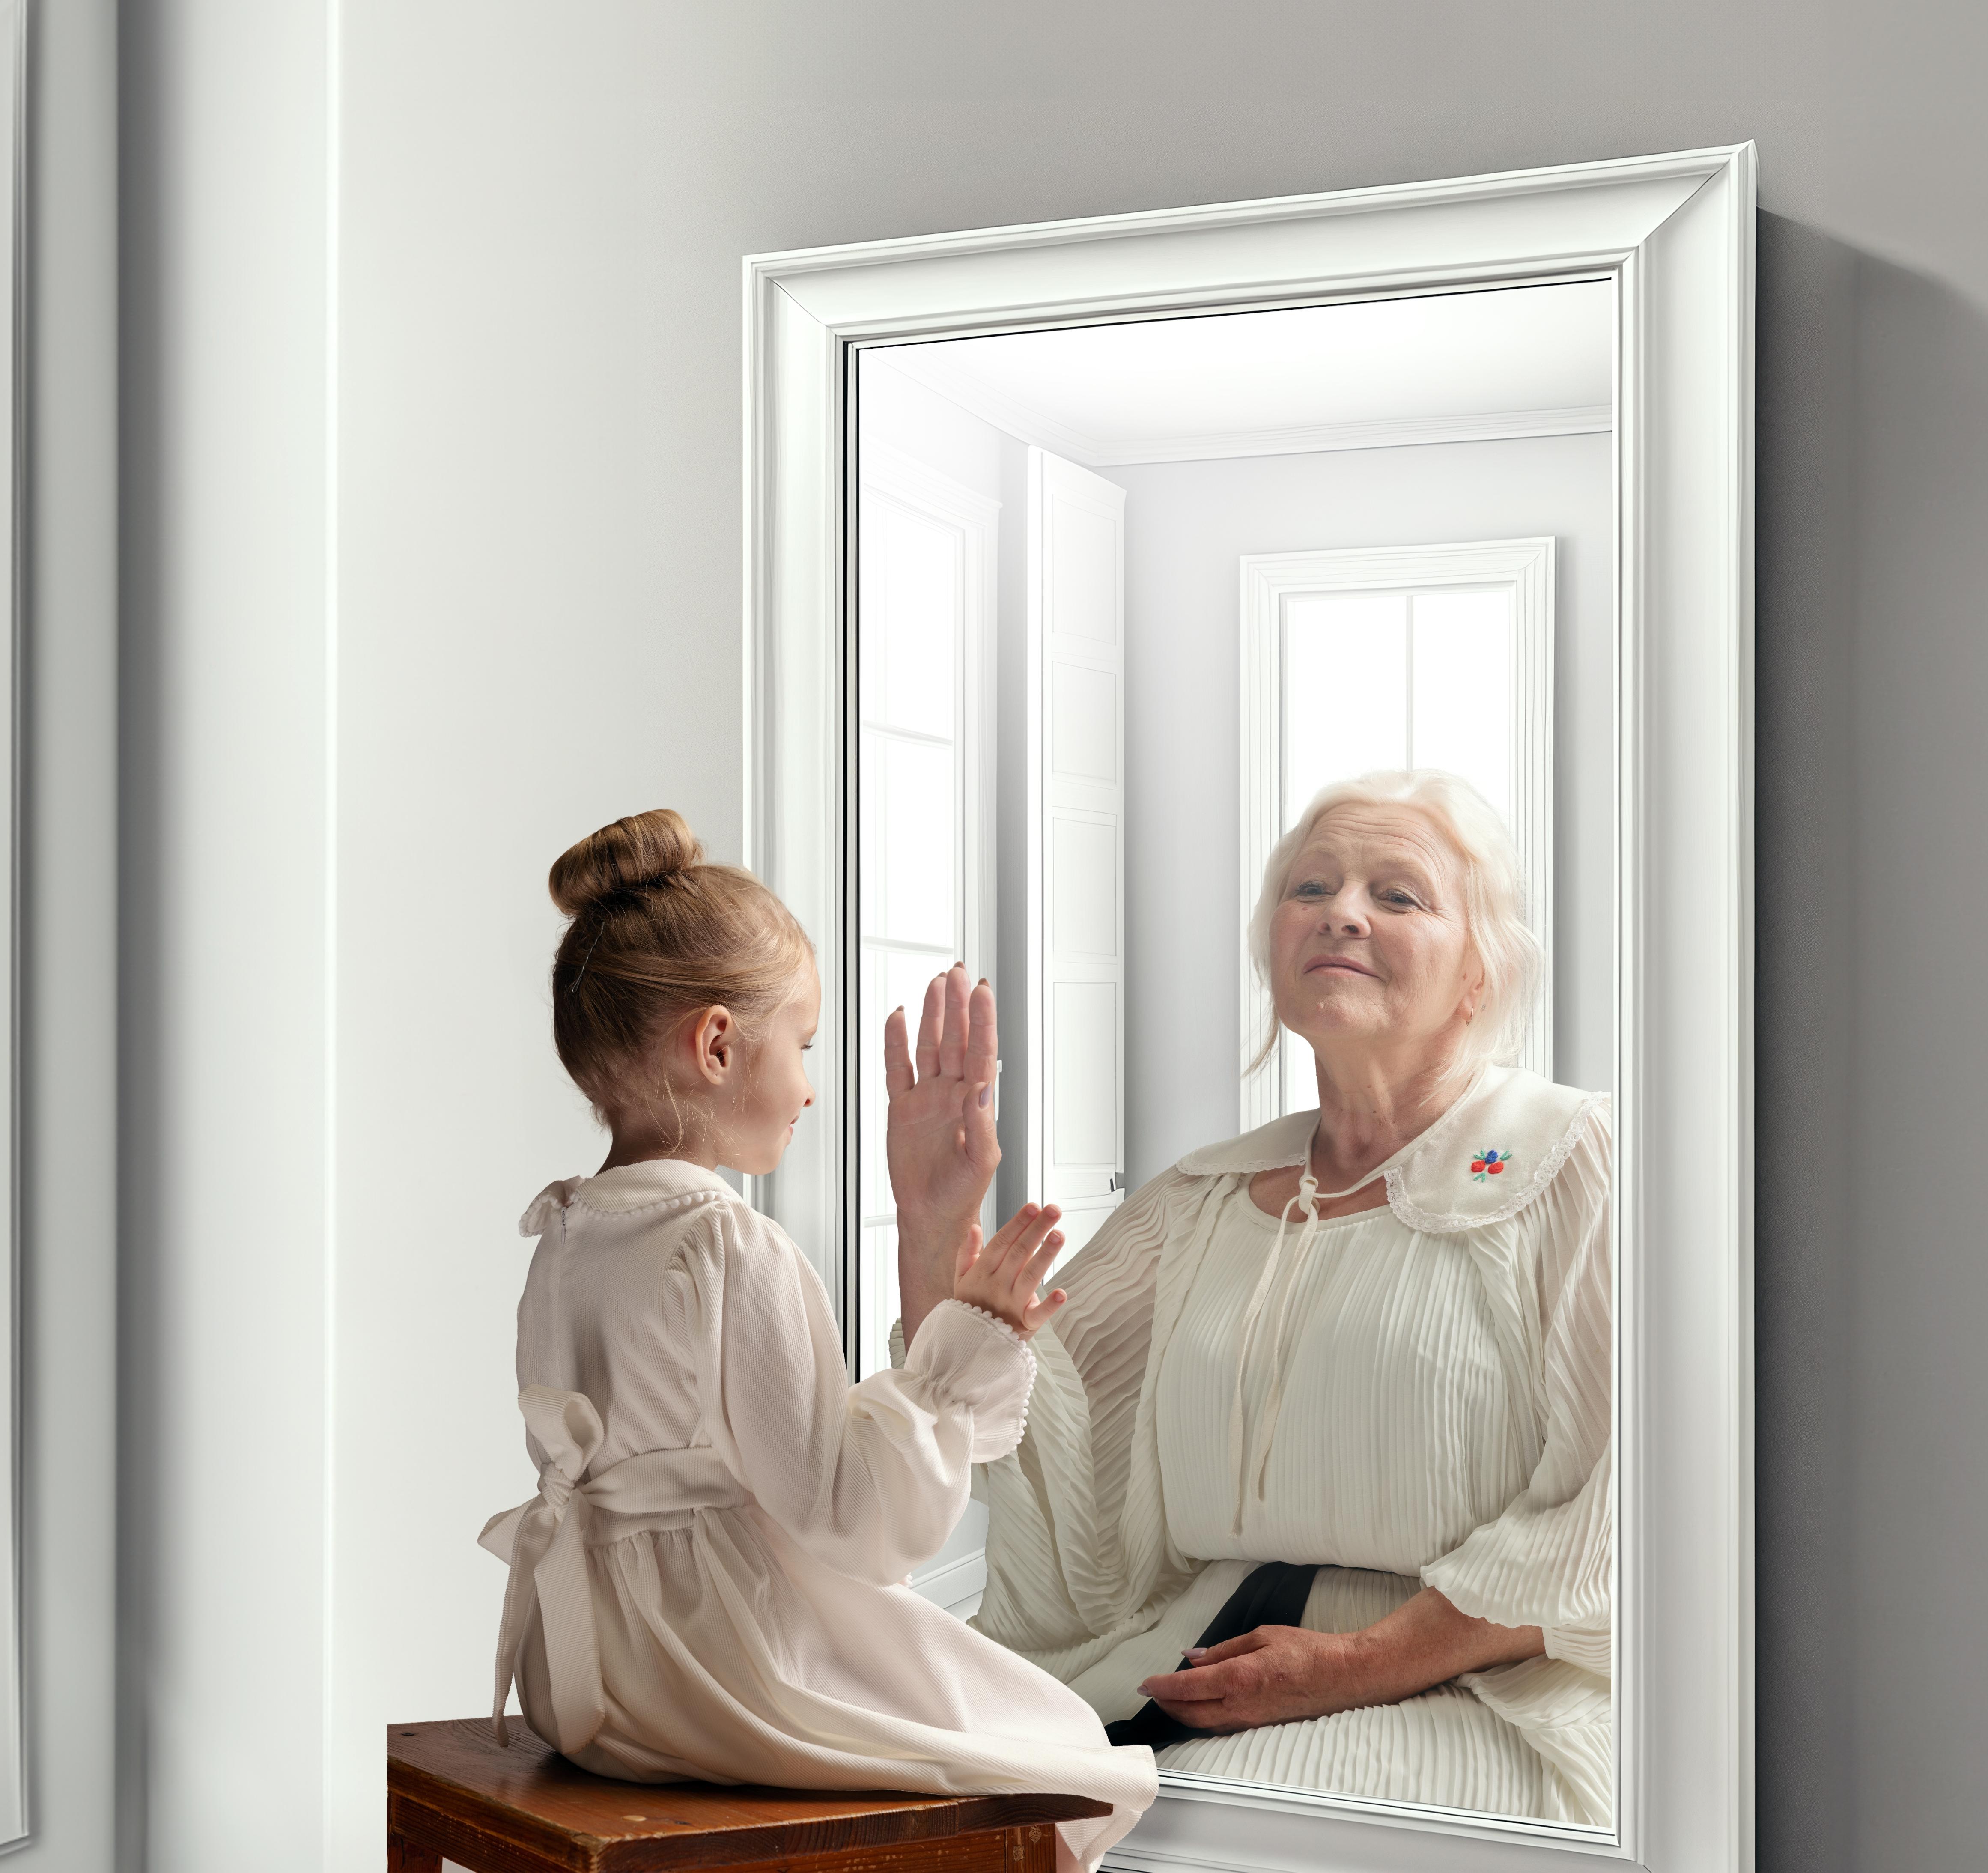 Creative conceptual collage. Little girl looking in mirror and seeing reflection of senior lady. Her future self. Child and grandmother. Concept of present, past and future, age, lifestyle, generation